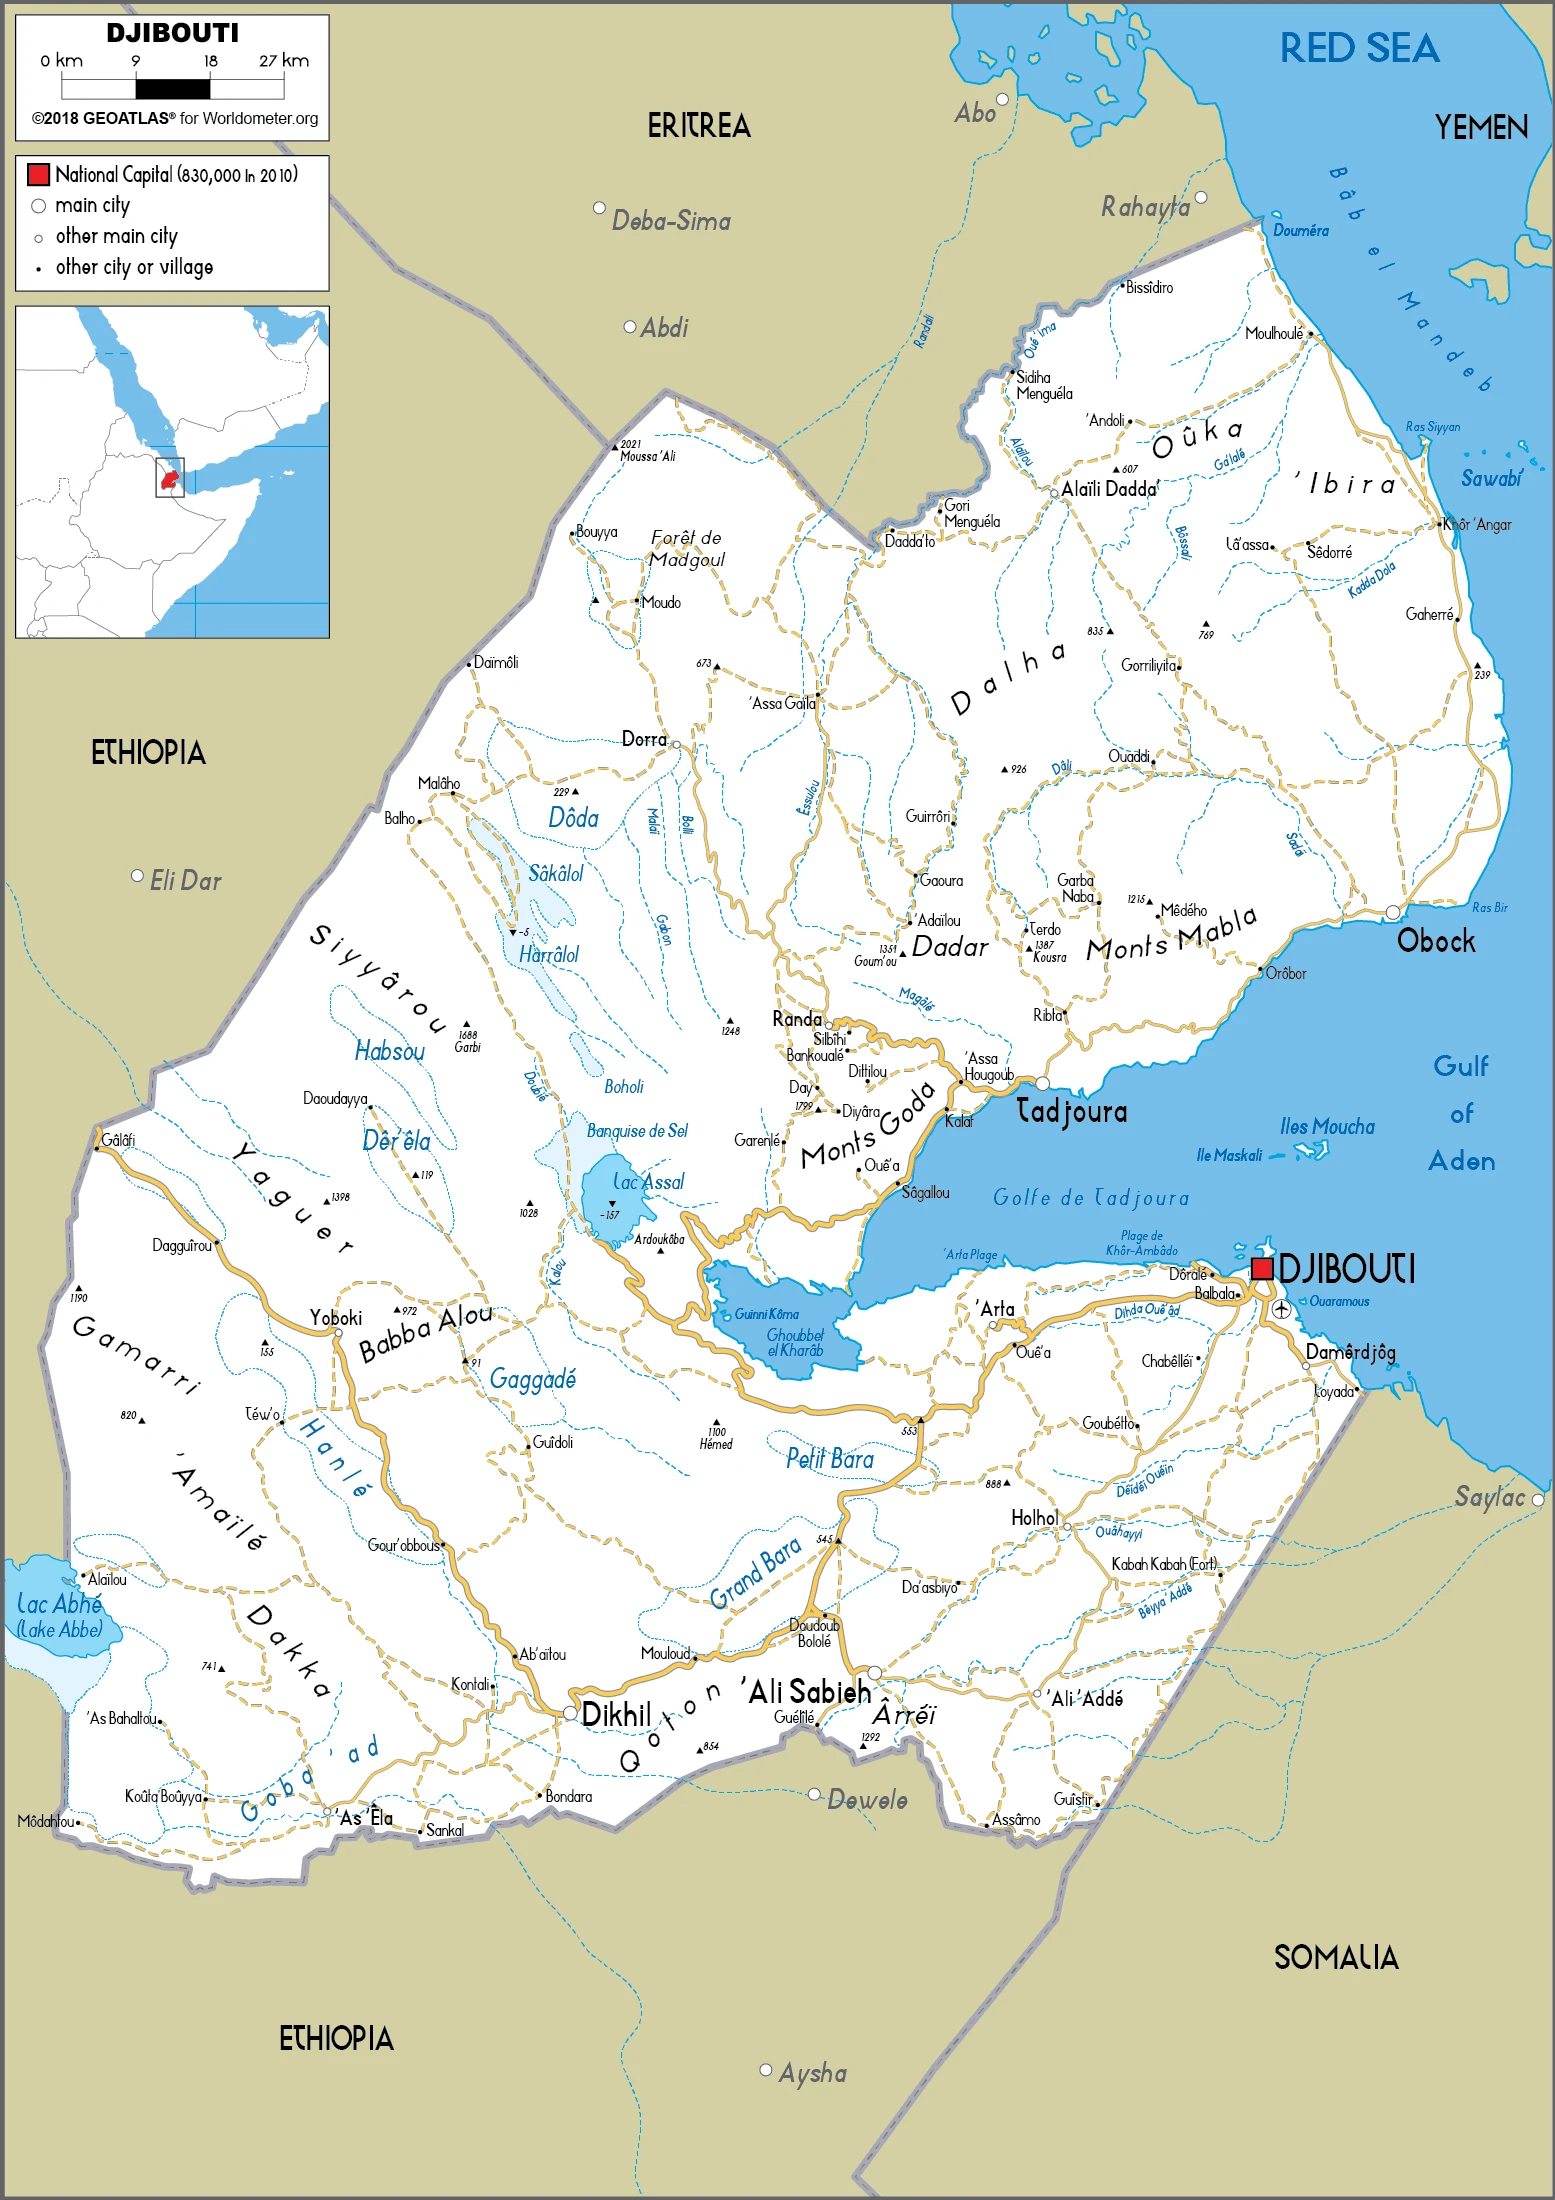 The route plan of the Djiboutian roadways.